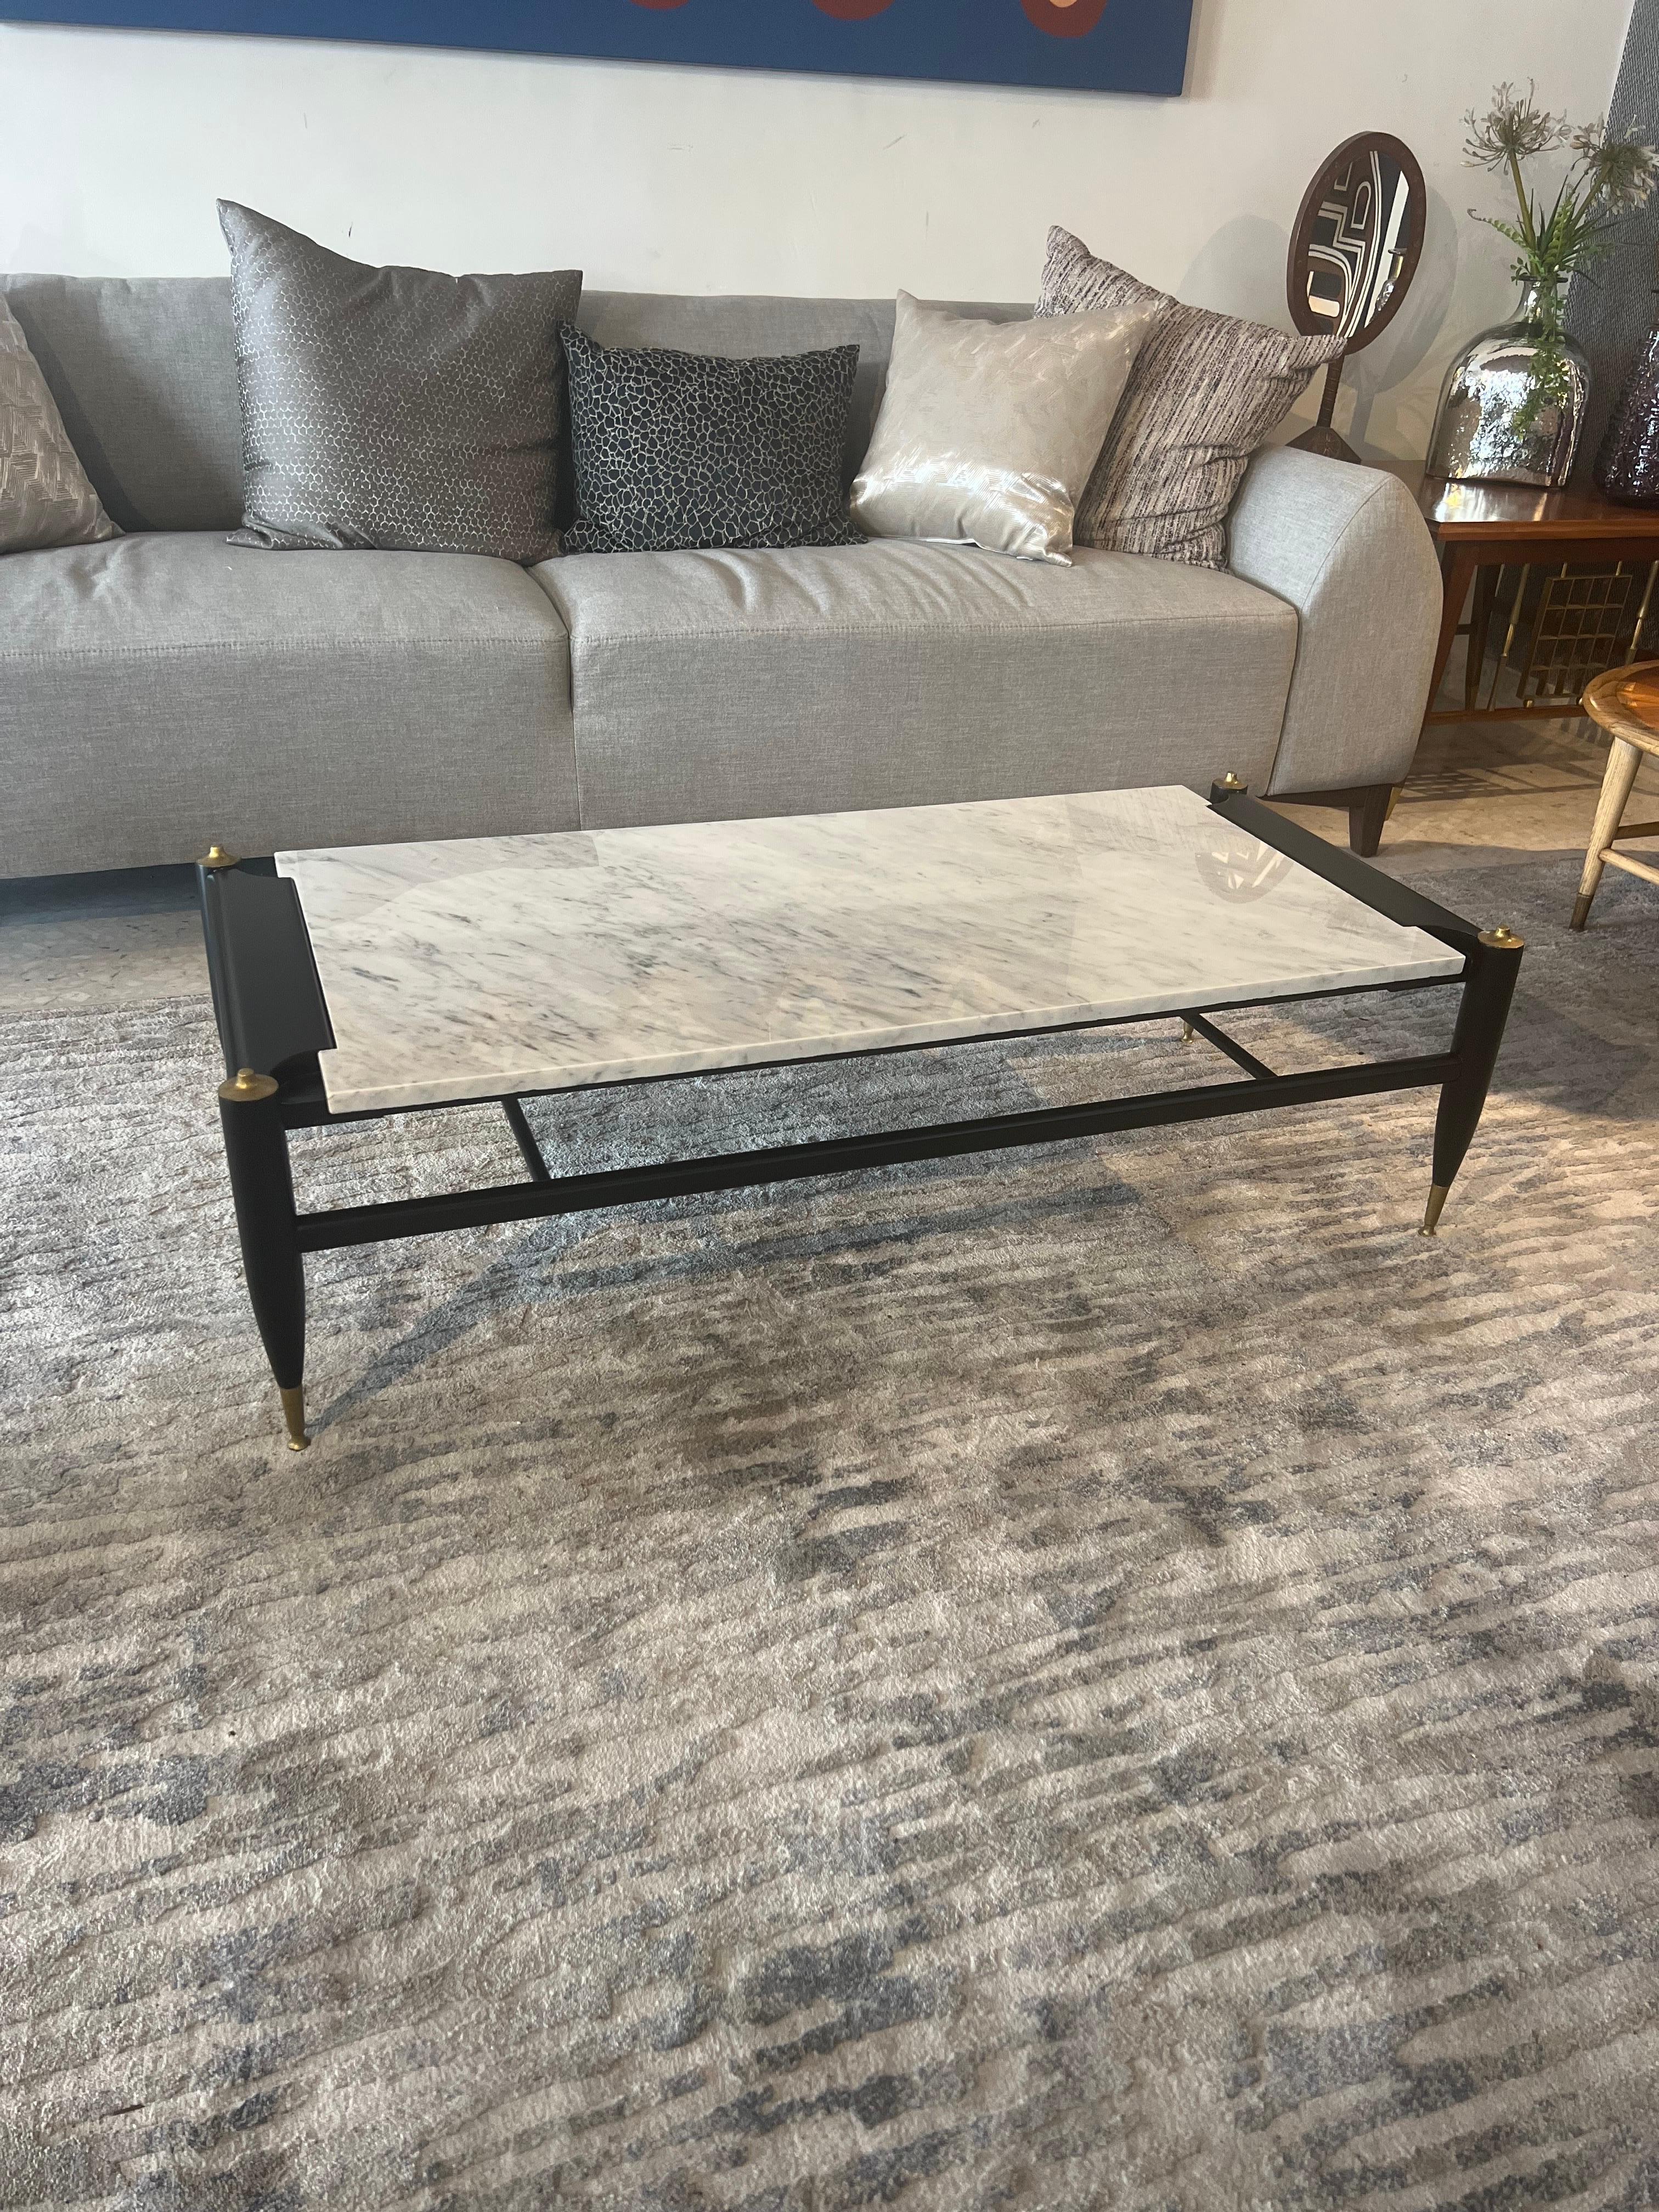 Mexican Mid-Century Modern Coffee Table For Sale